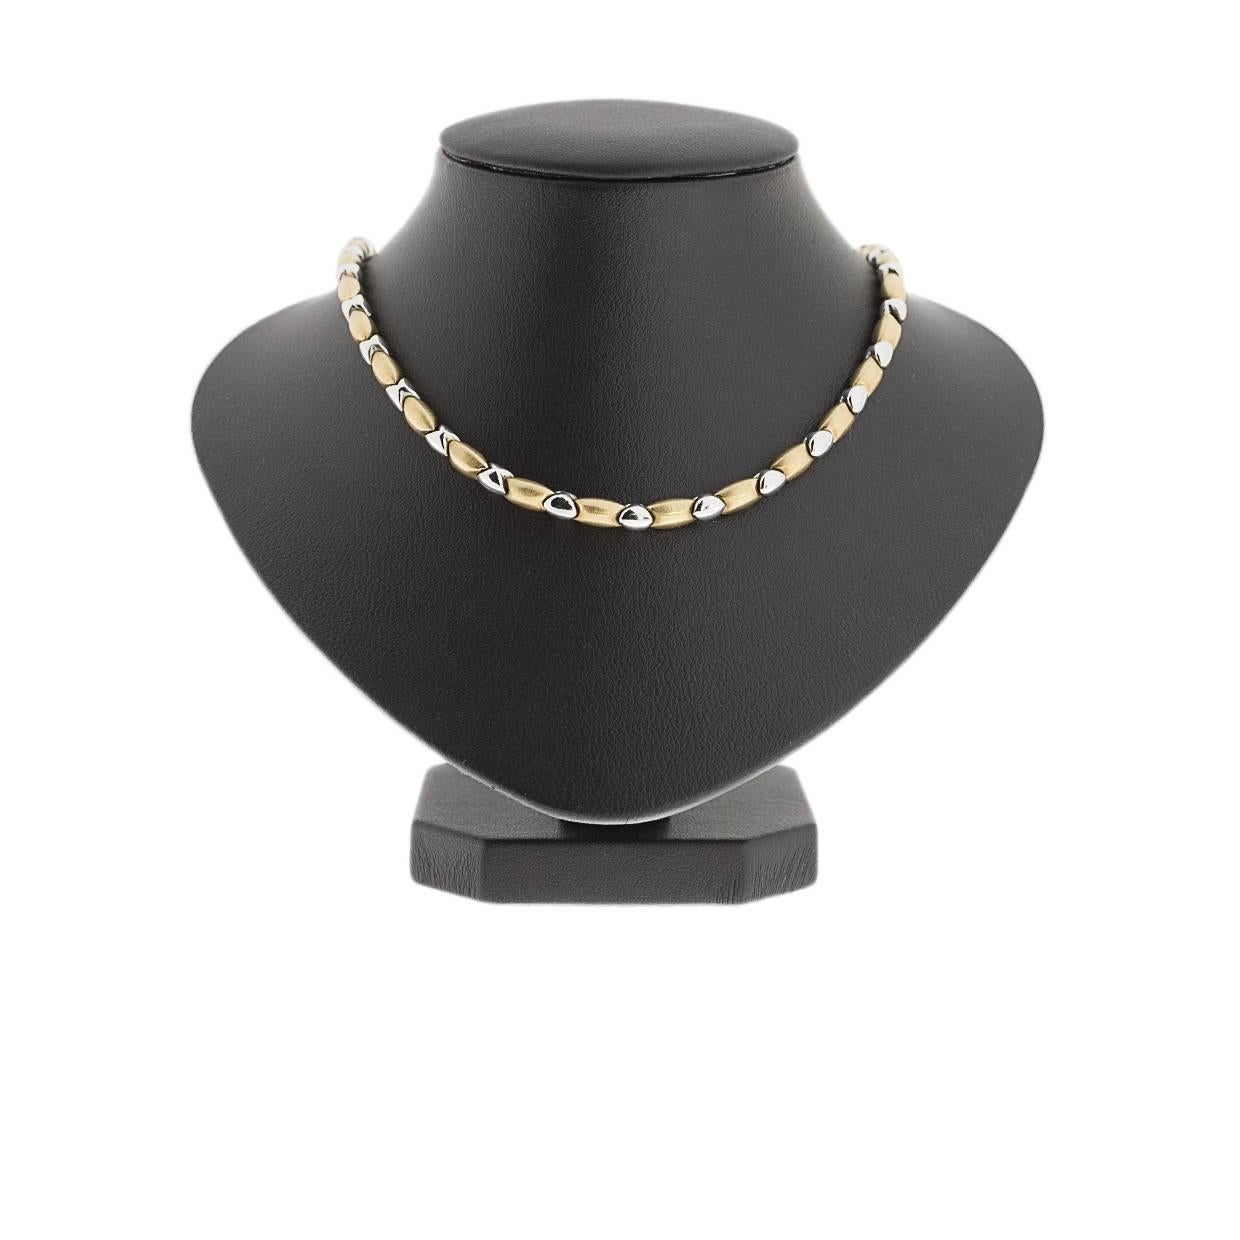 This lovely necklace offers a classy & unique look with brushed finish yellow gold beads alternating with high polished white gold beads. The necklace is comprised of 14 karat gold. It measures 15